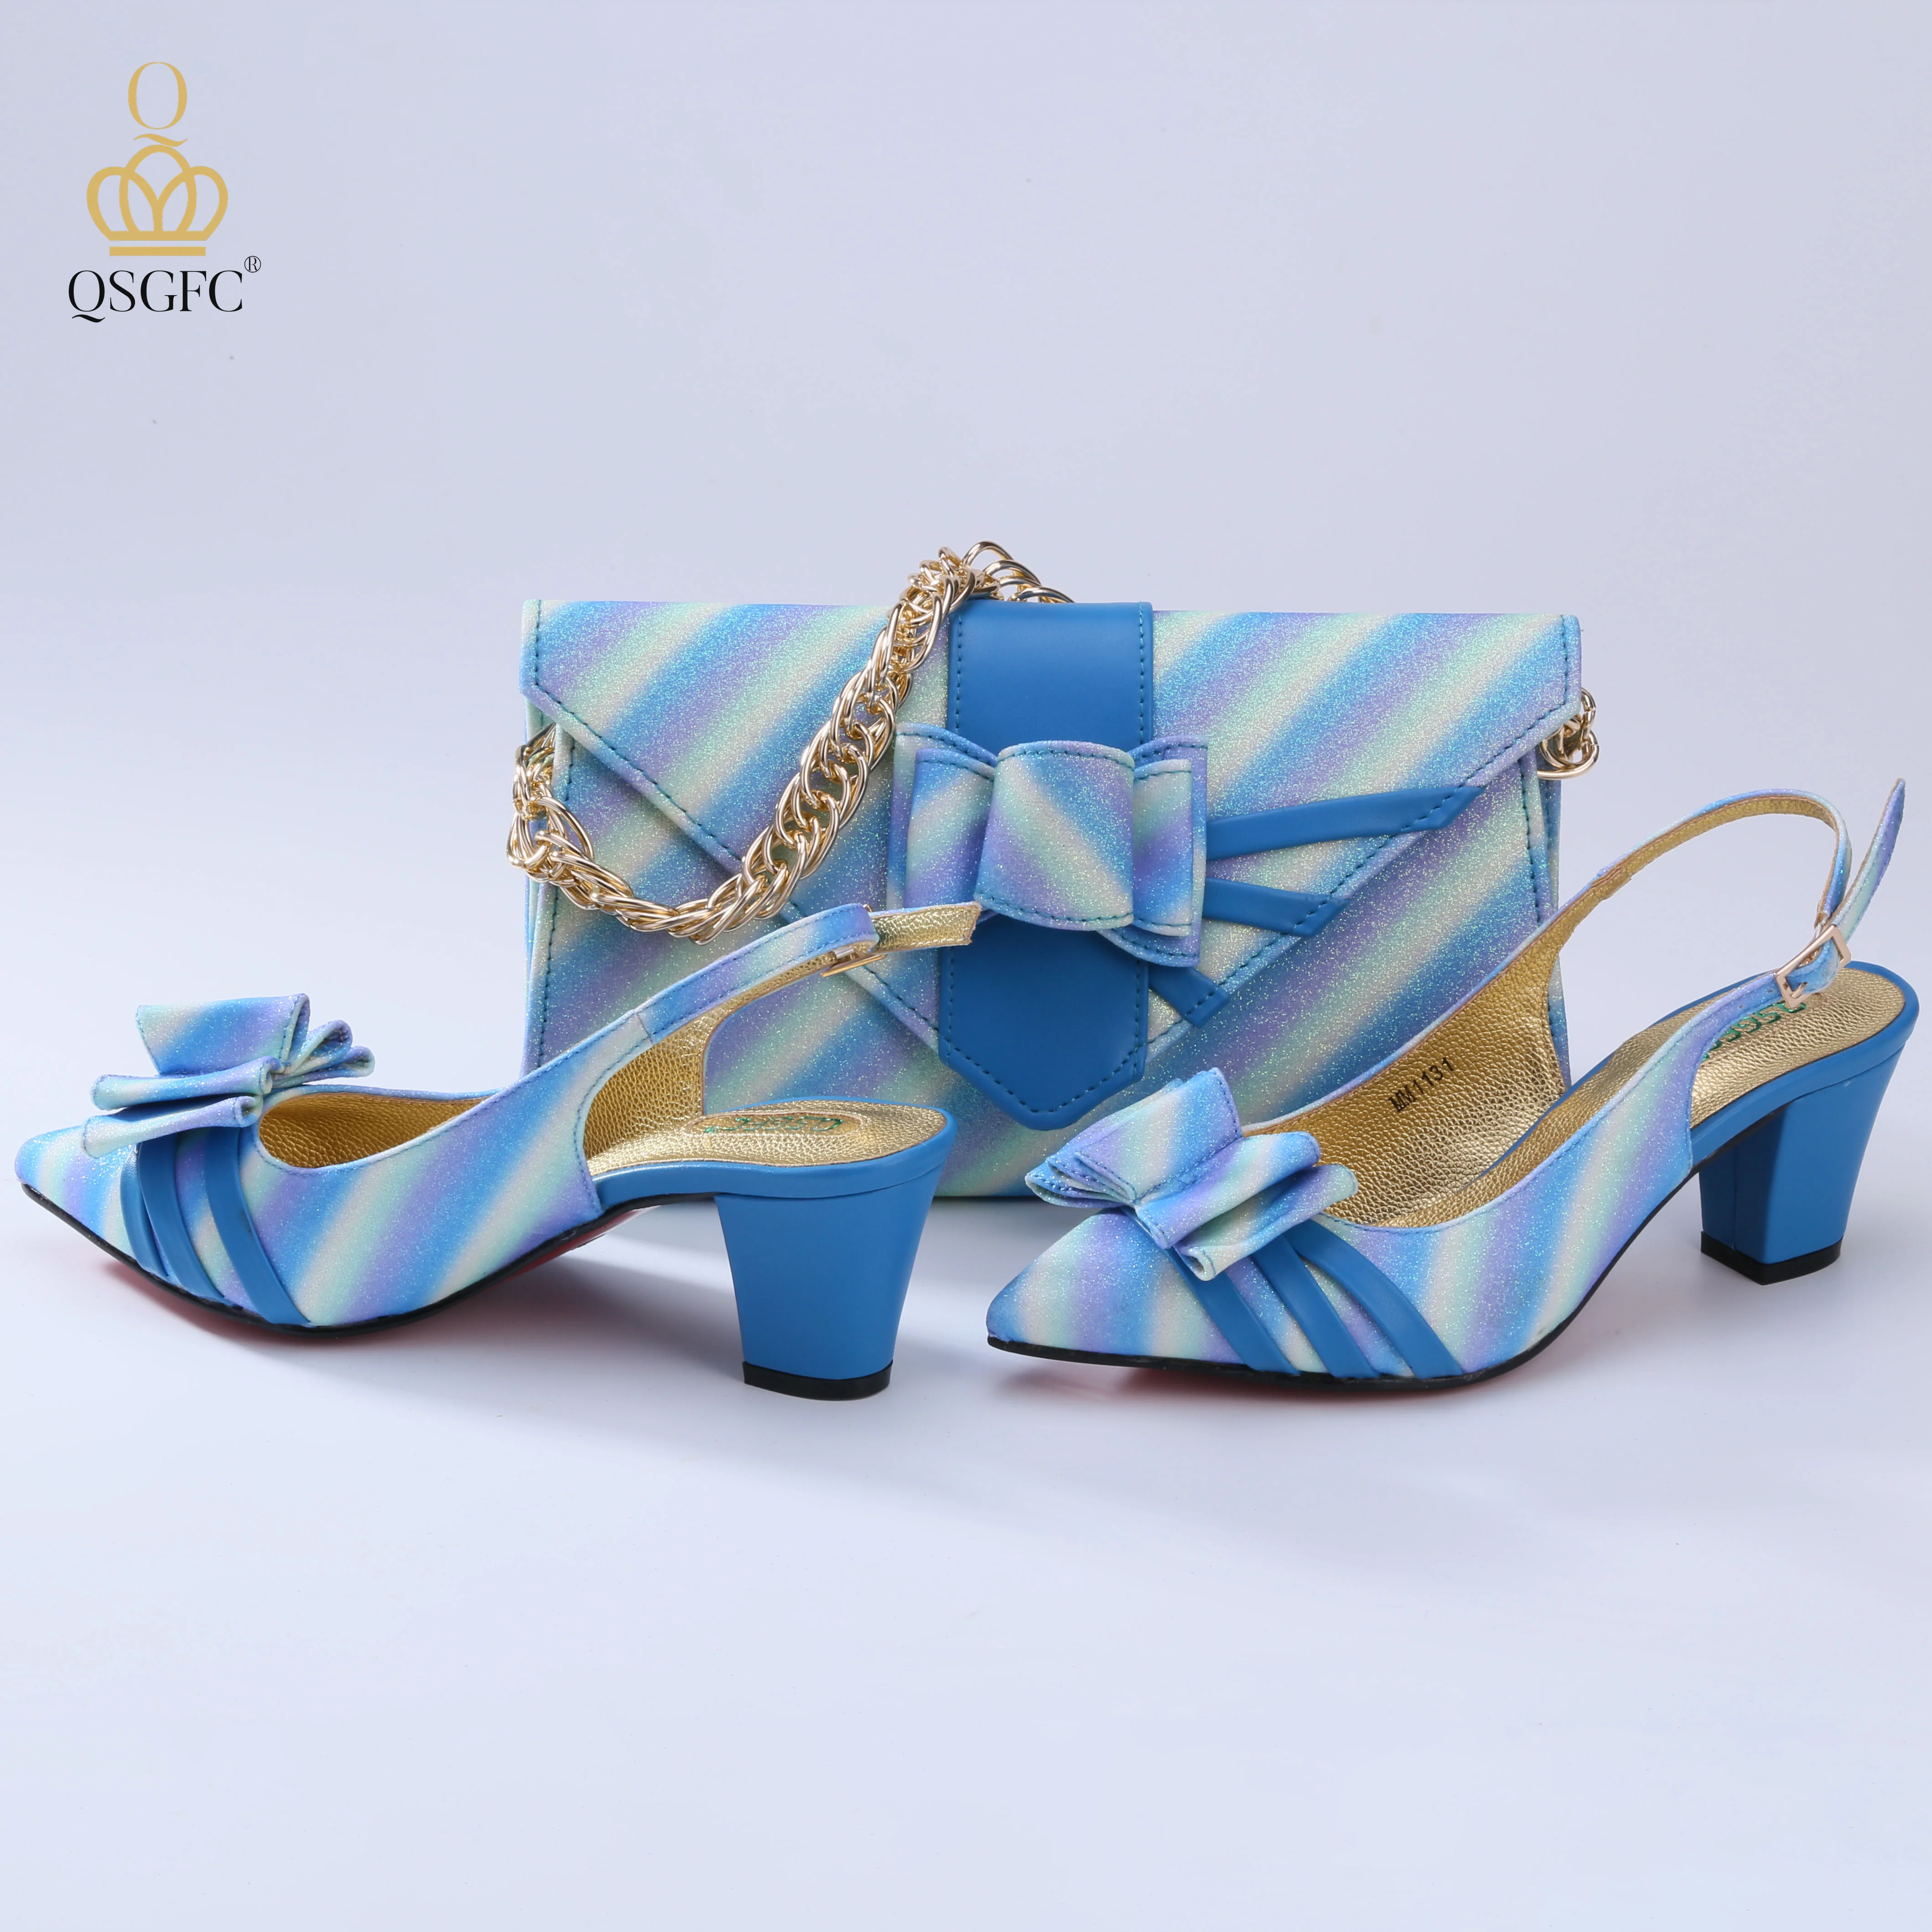 

QSGFC Italian Design Newest Colorful Stripes Pattern Sweet Style Noble Sky Blue Color Shoes and Bag Set for Party Wedding